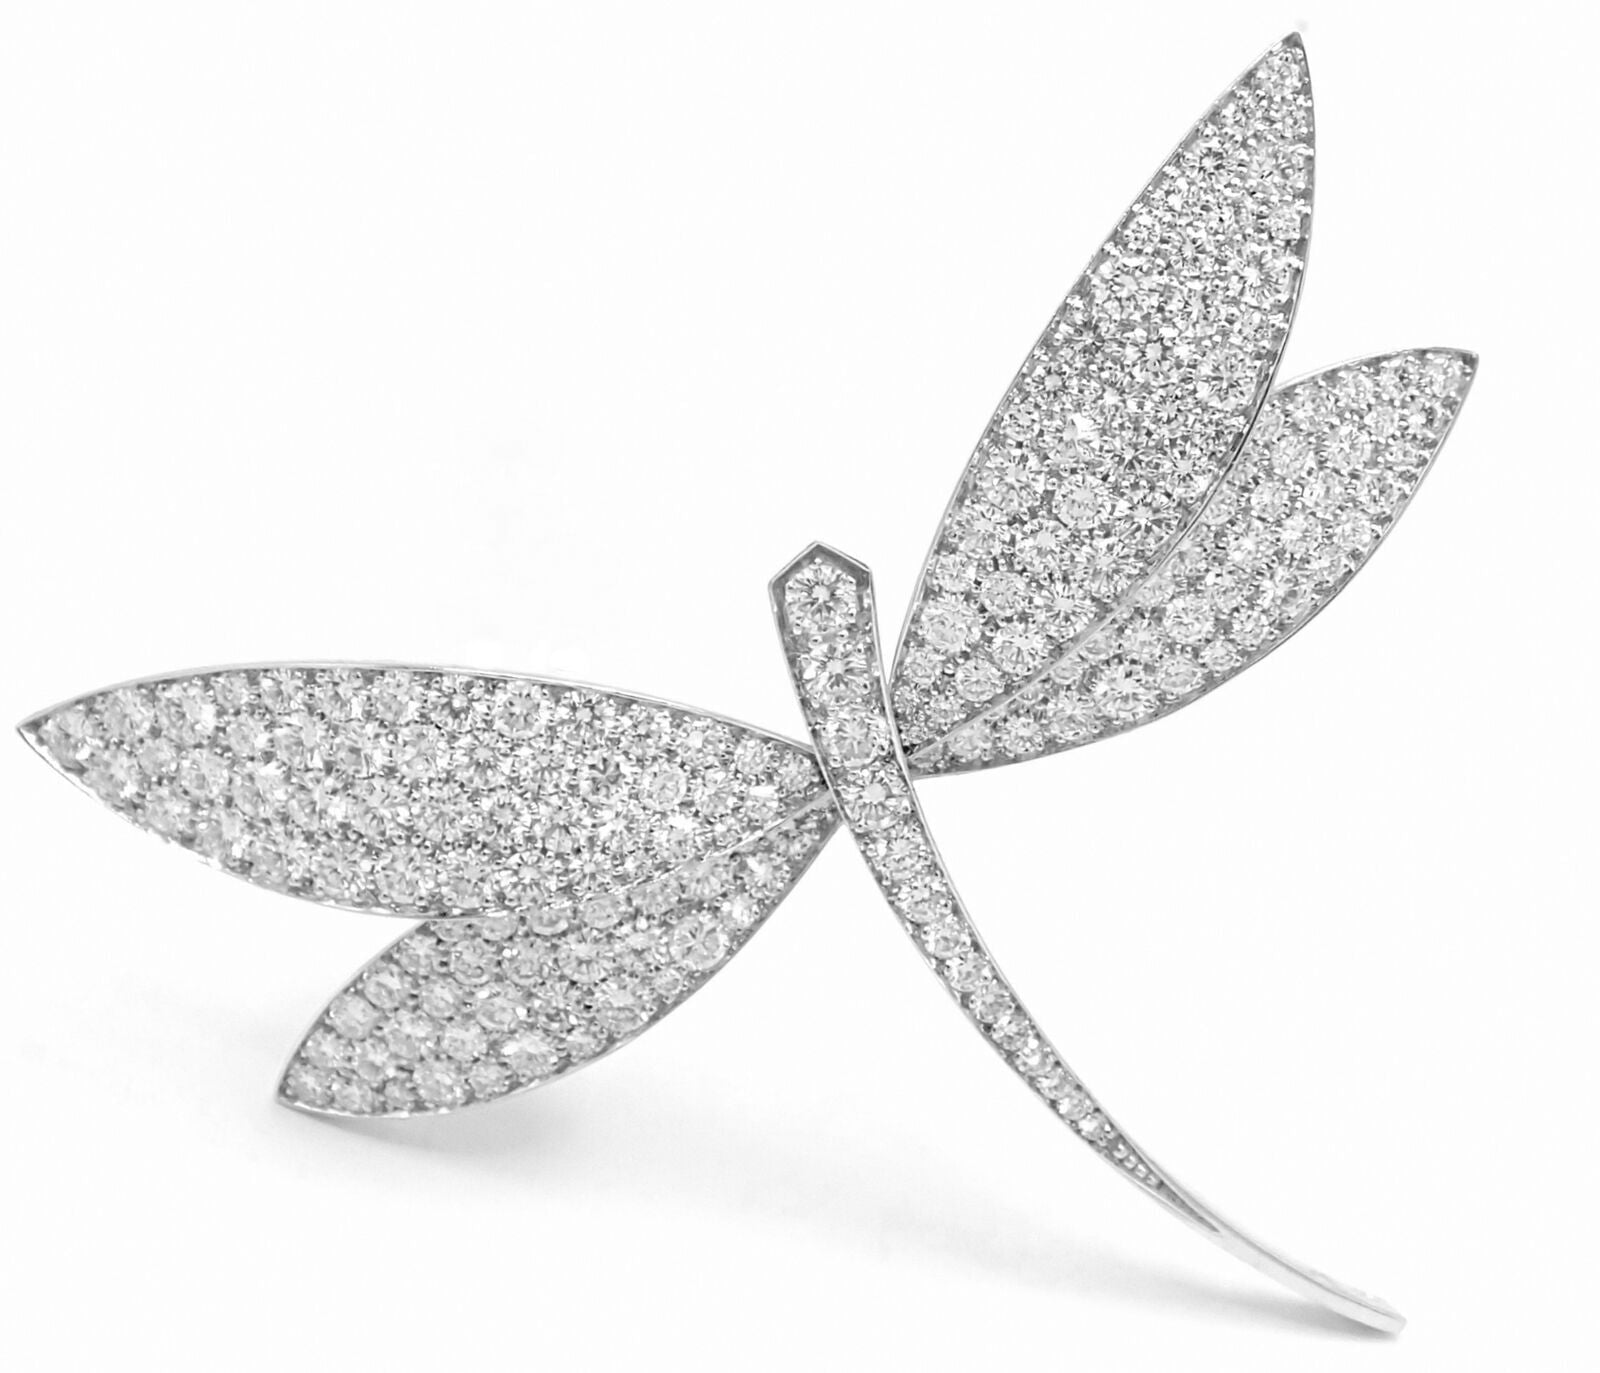 Van Cleef & Arpels Jewelry & Watches:Fine Jewelry:Brooches & Pins Authentic! Van Cleef & Arpels Dragonfly 18k White Gold Diamond Large Pin Brooch